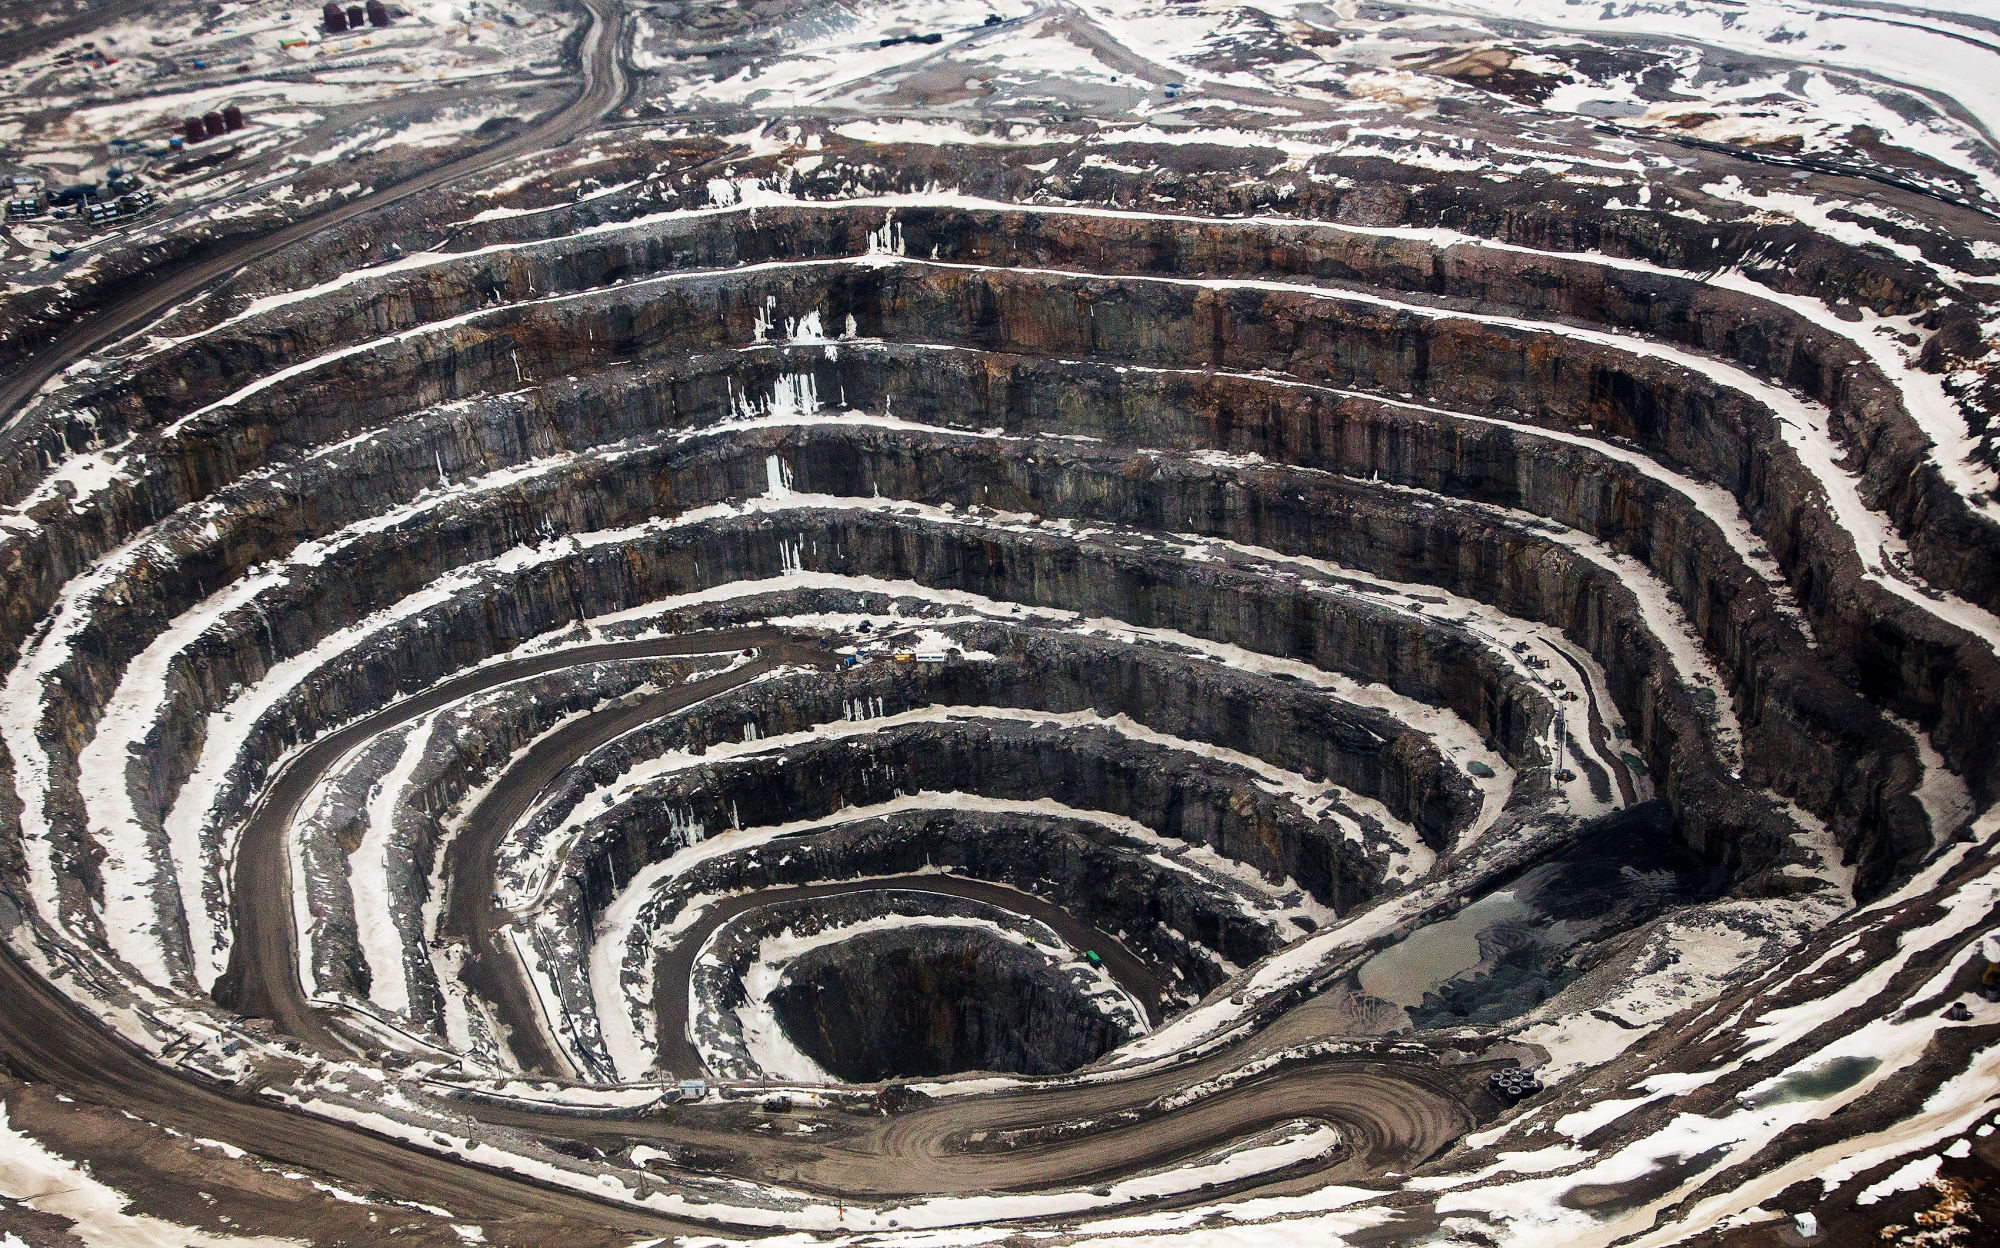 The open pit stands at the Diavik Diamond Mine in the North Slave Region of the Northwest Territories, Canada.